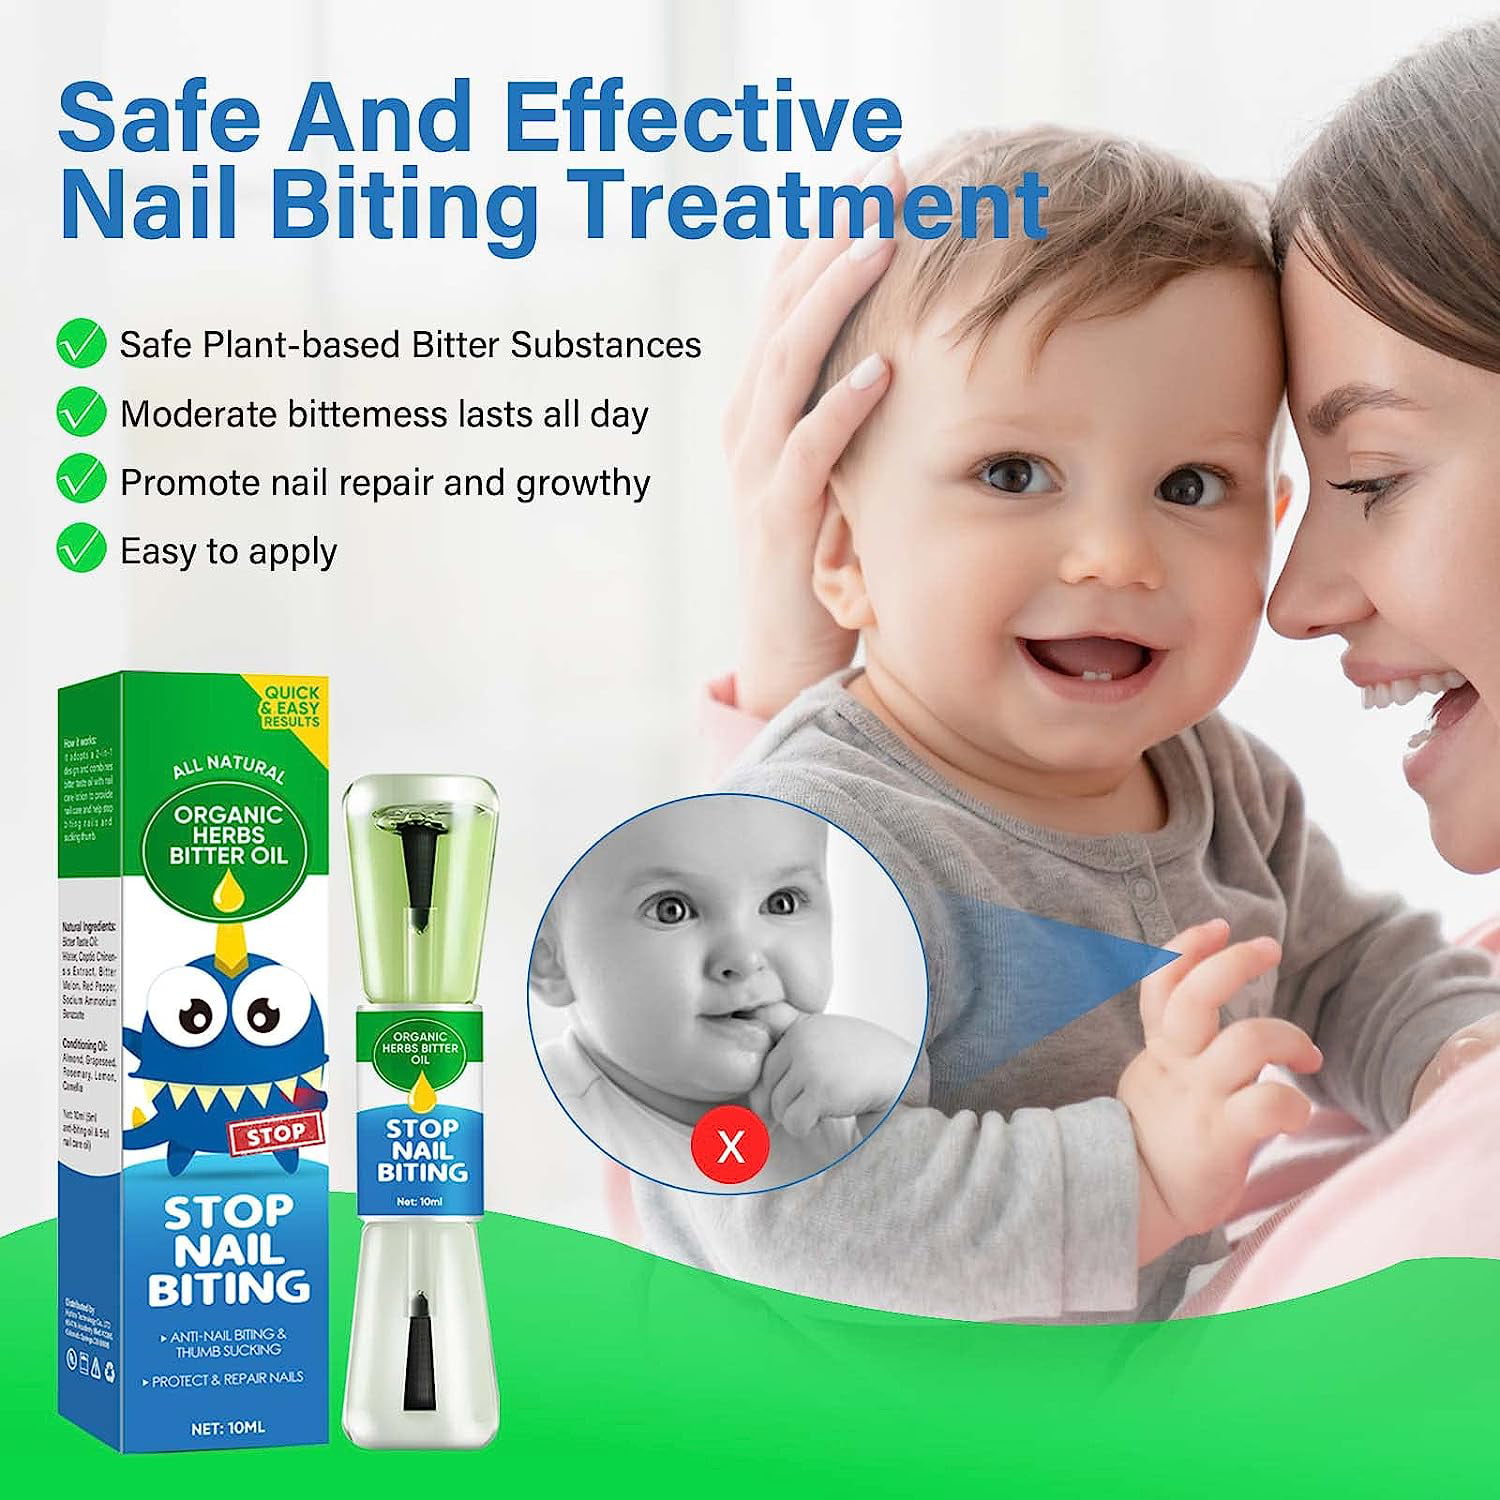 Amazon.com : Nail Biting Treatment for Kids, Nail Biting Prevention Against  Nail Eating for Children, Thumb Sucking Deterrent with Natural Ingredients,  Suitable for Kids and Adults : Beauty & Personal Care